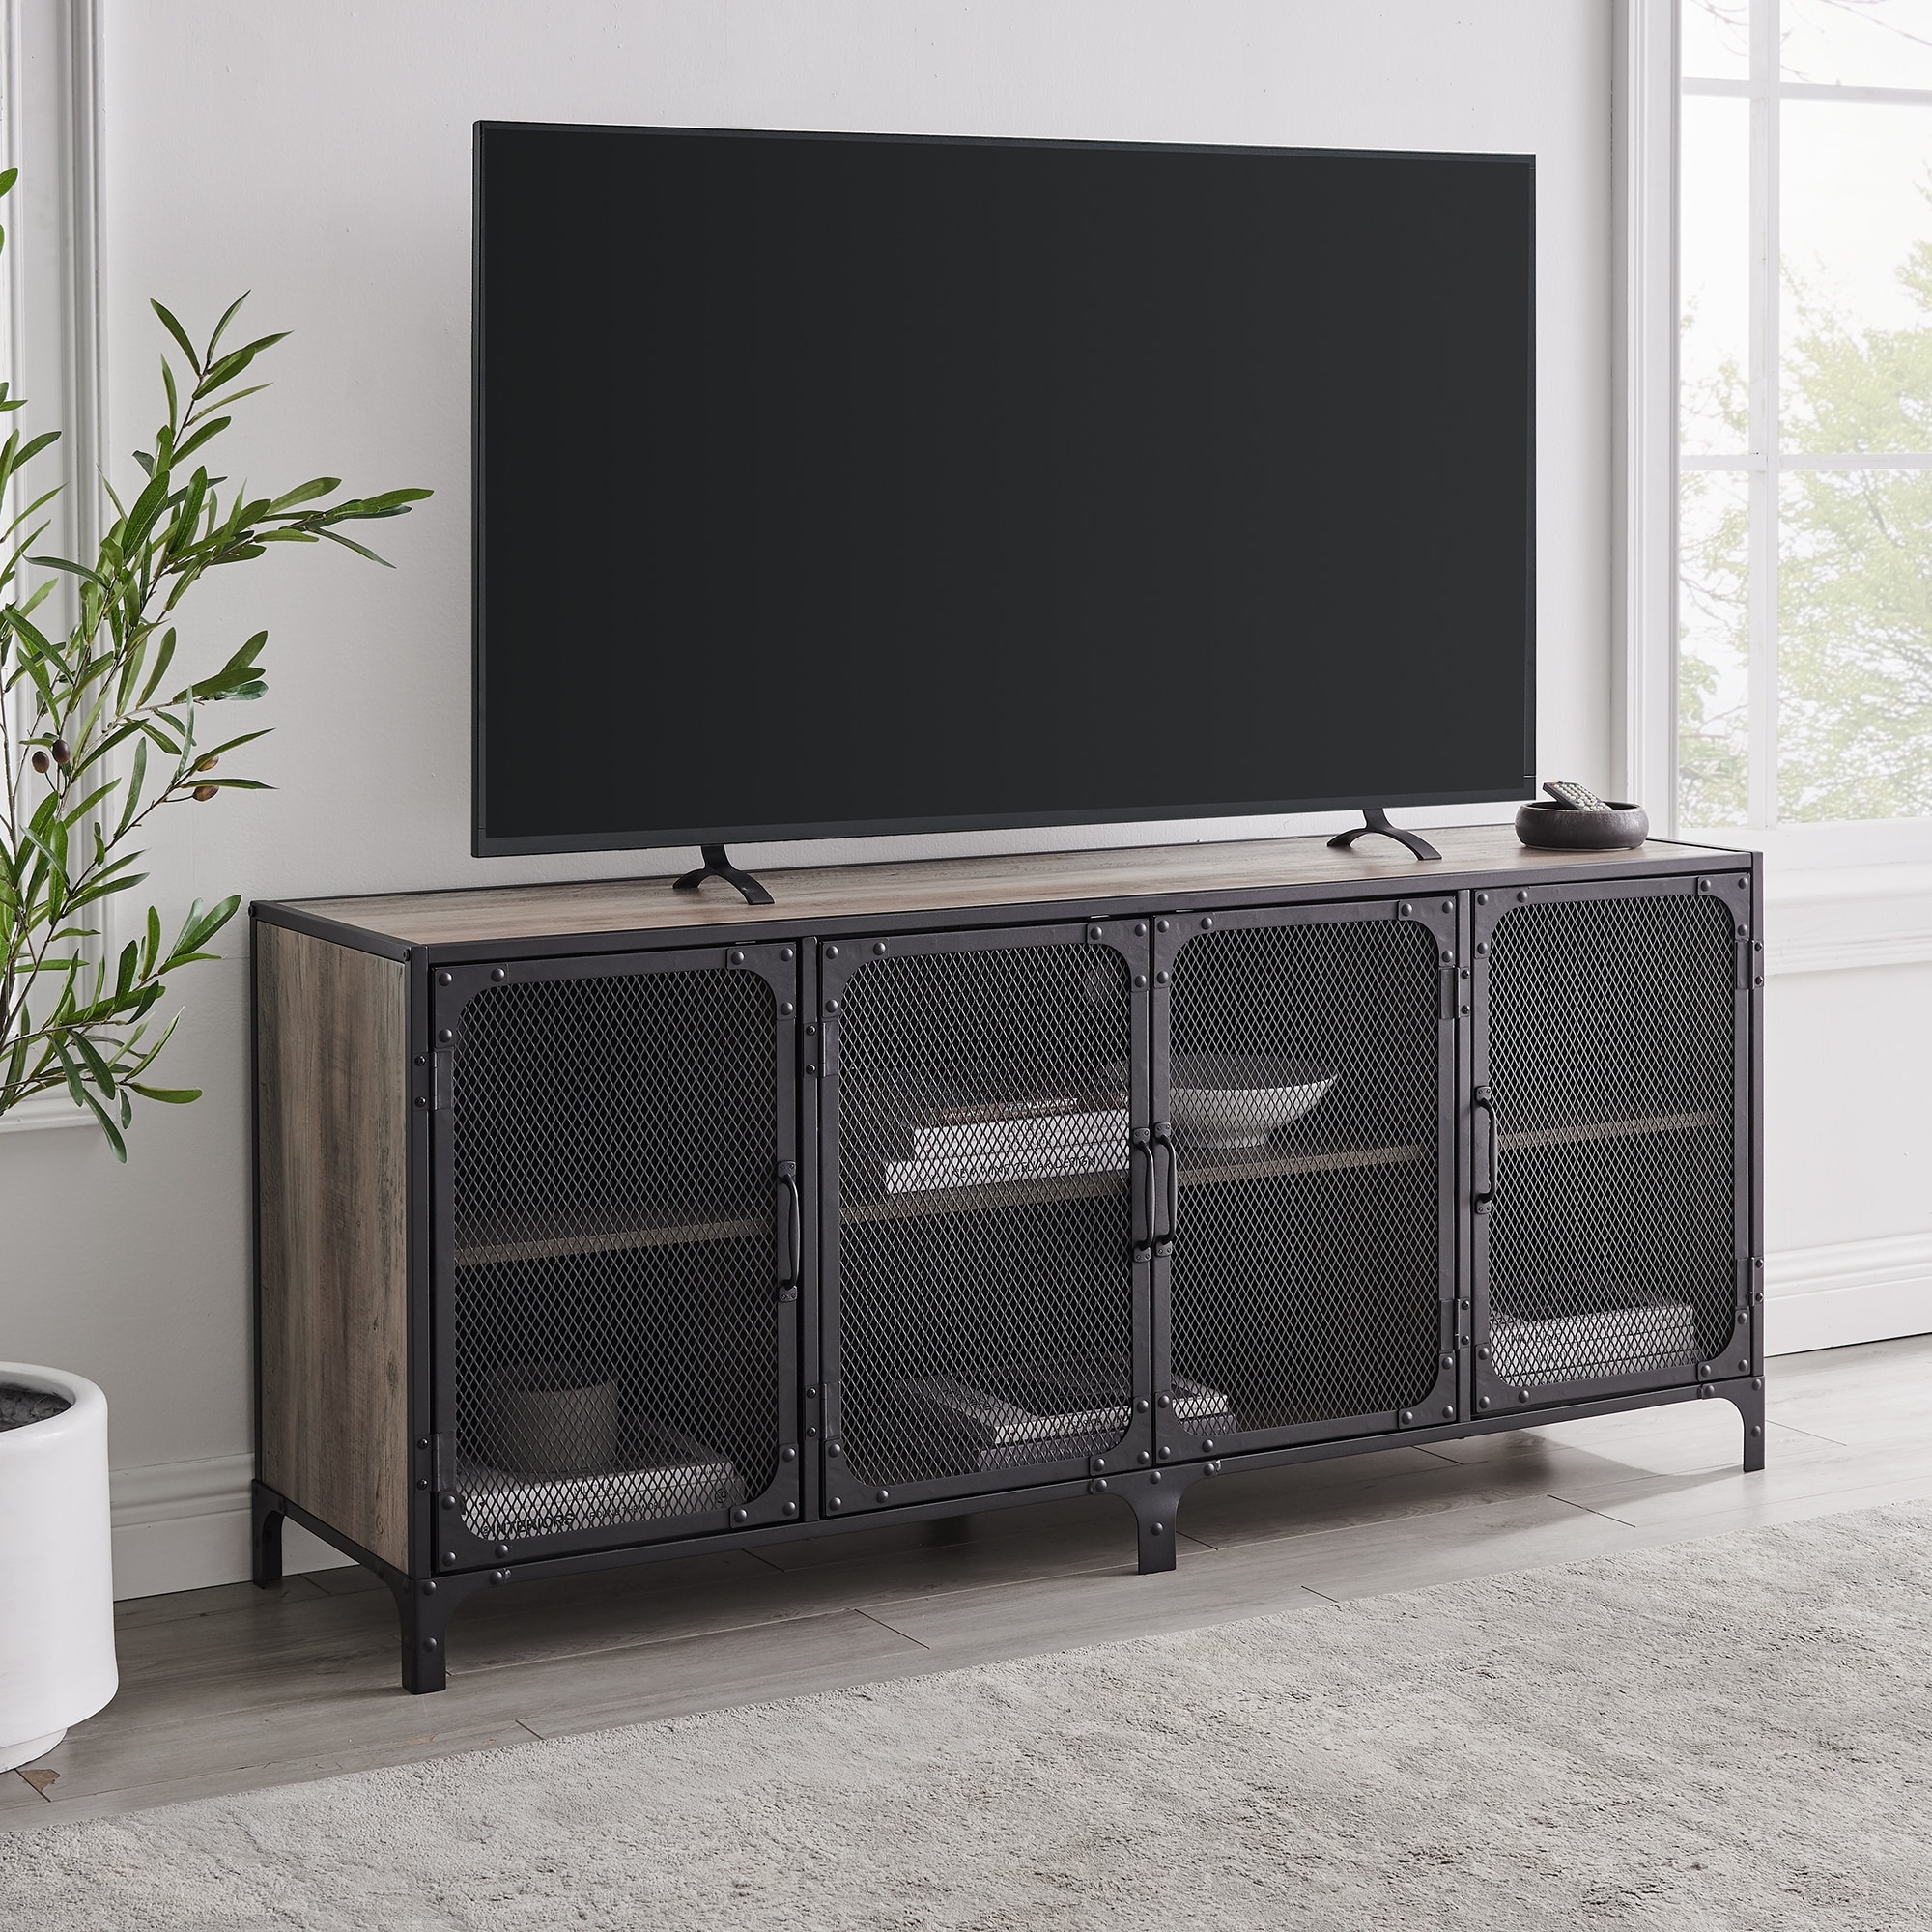 Carbon Loft Pierpont 60 Inch Industrial Tv Stand Console Overstock 22395050